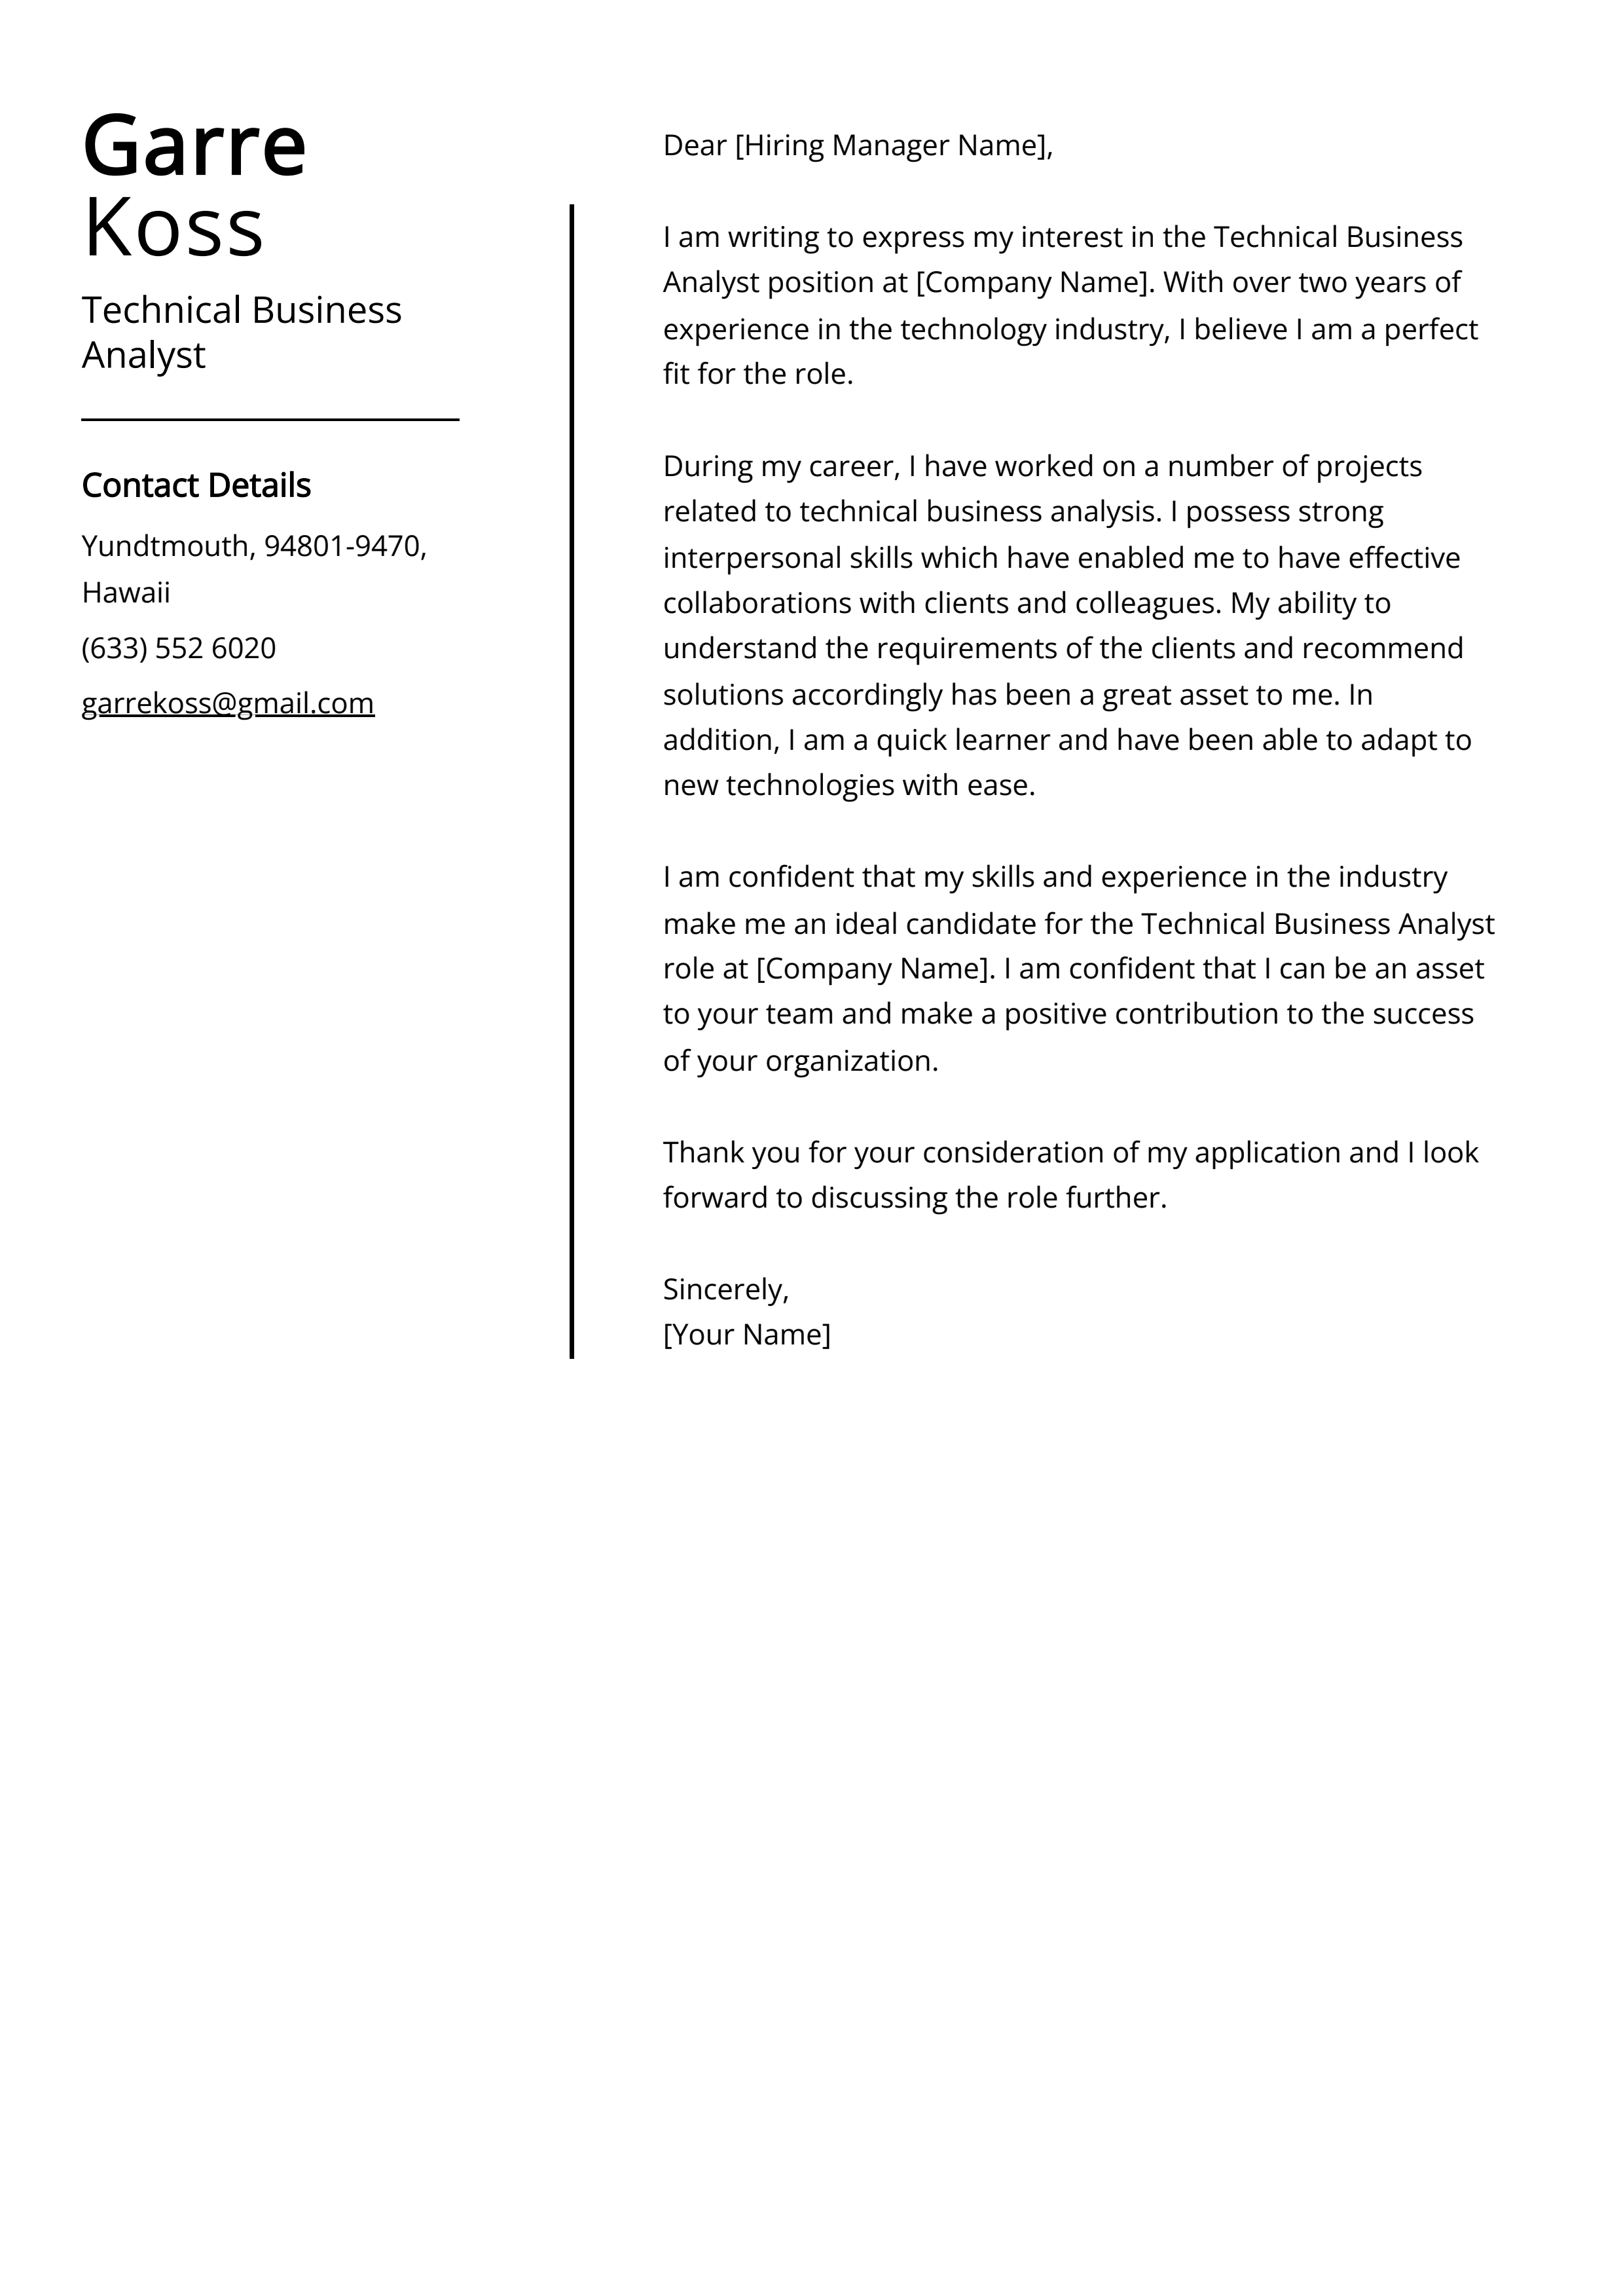 Technical Business Analyst Cover Letter Example